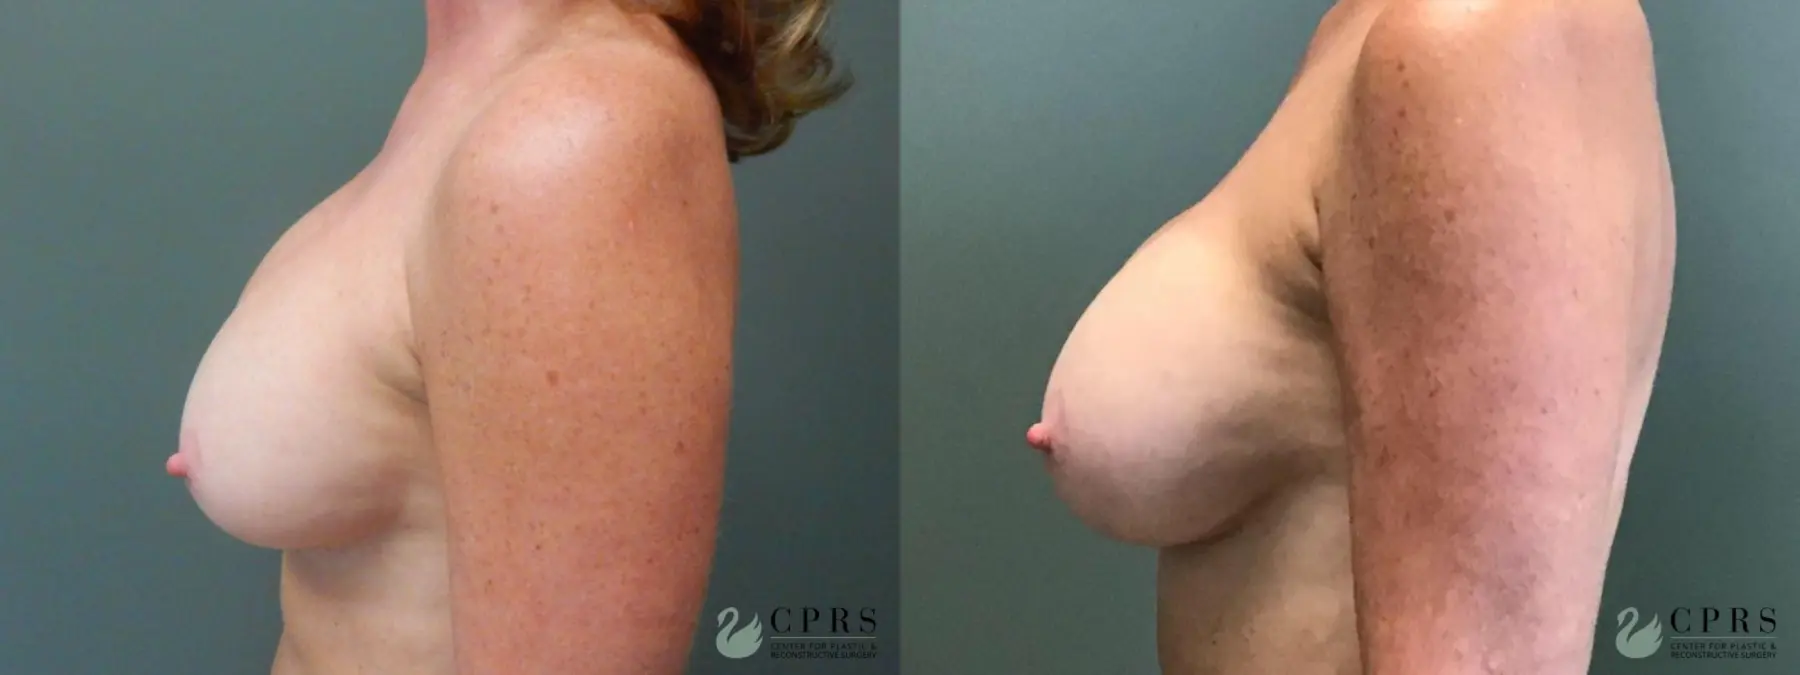 Revision Breast Augmentation : Patient 2 - Before and After 2